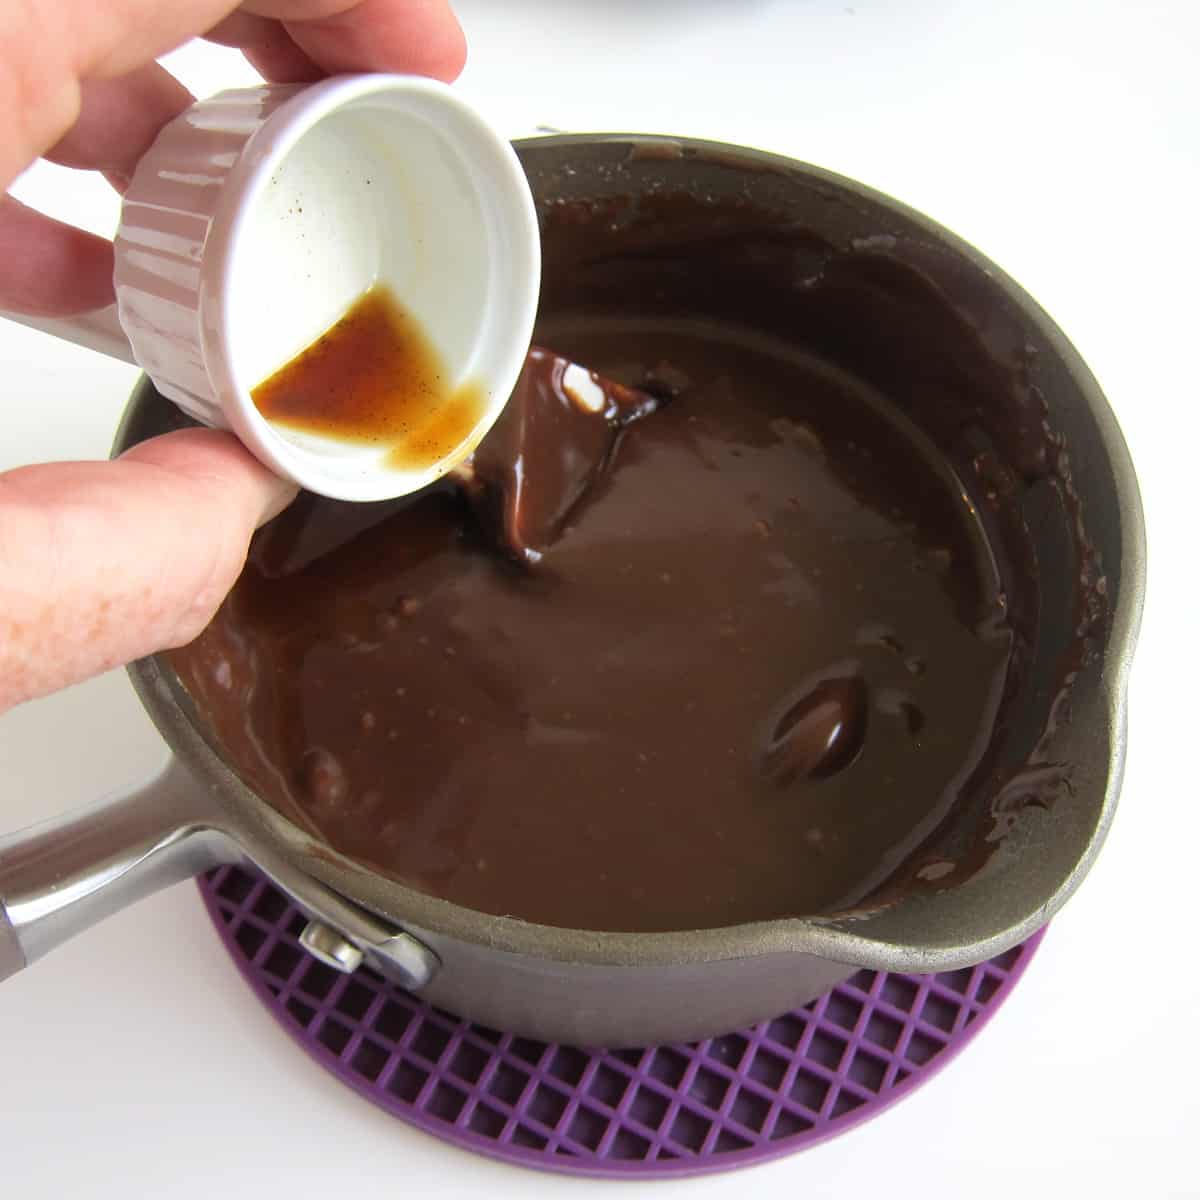 Pouring vanilla extract into a saucepan filled with hot fudge sauce.